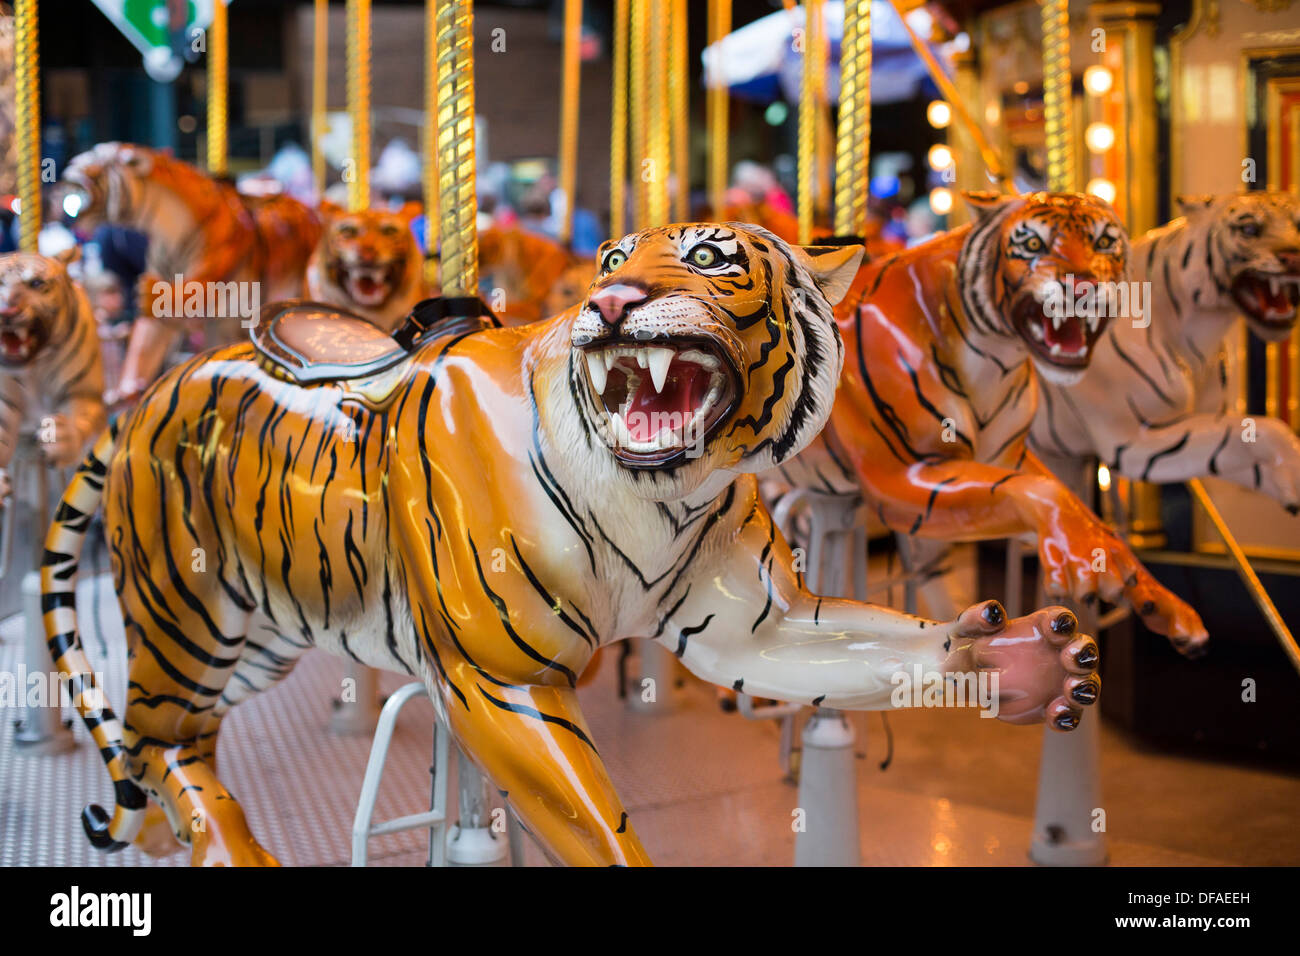 Detroit, Michigan - The carousel at Comerica Park, home of the Detroit Tigers baseball team. Stock Photo